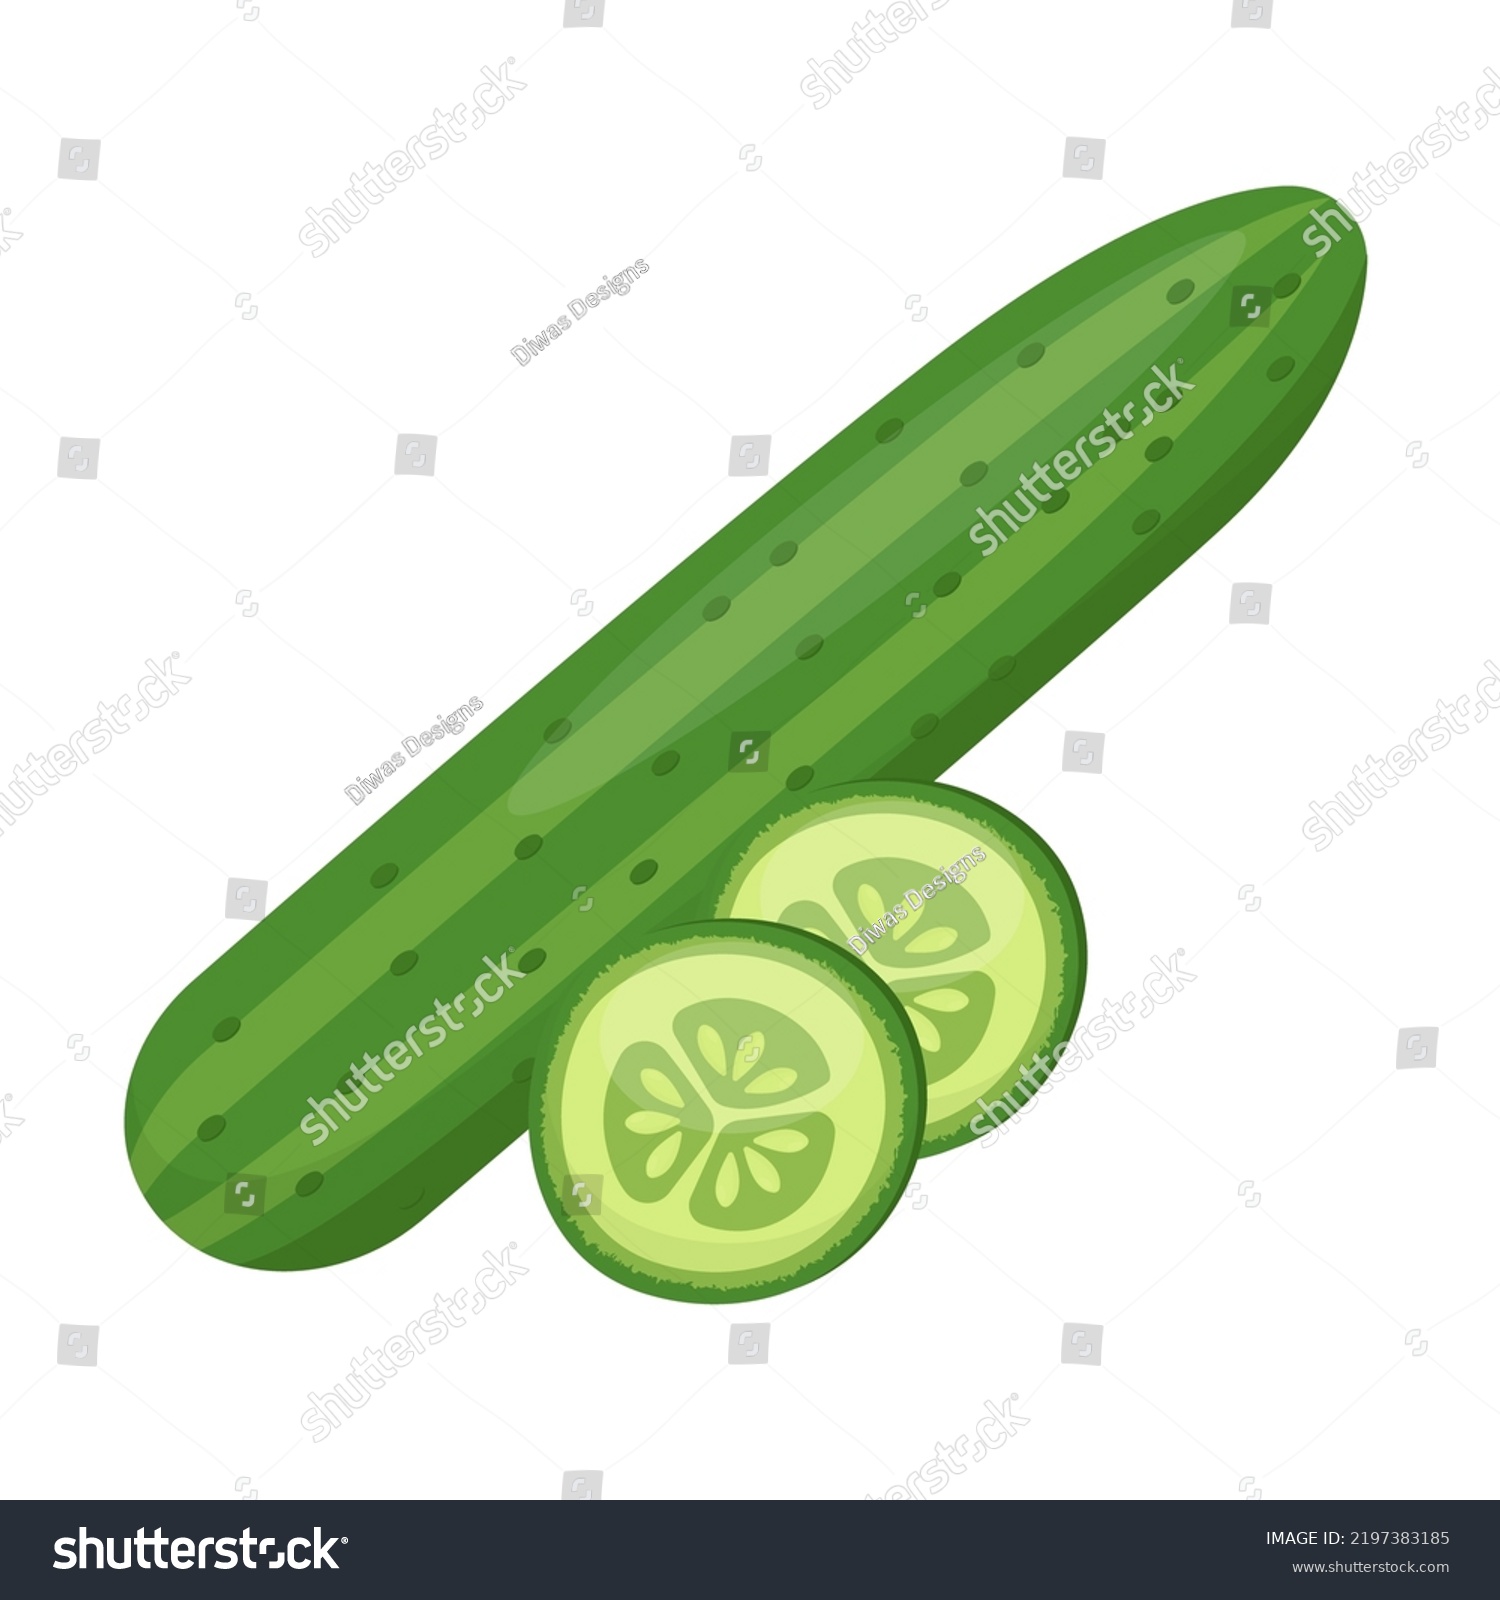 cucumber with slices flat vector illustration clipart isolated on white background #2197383185